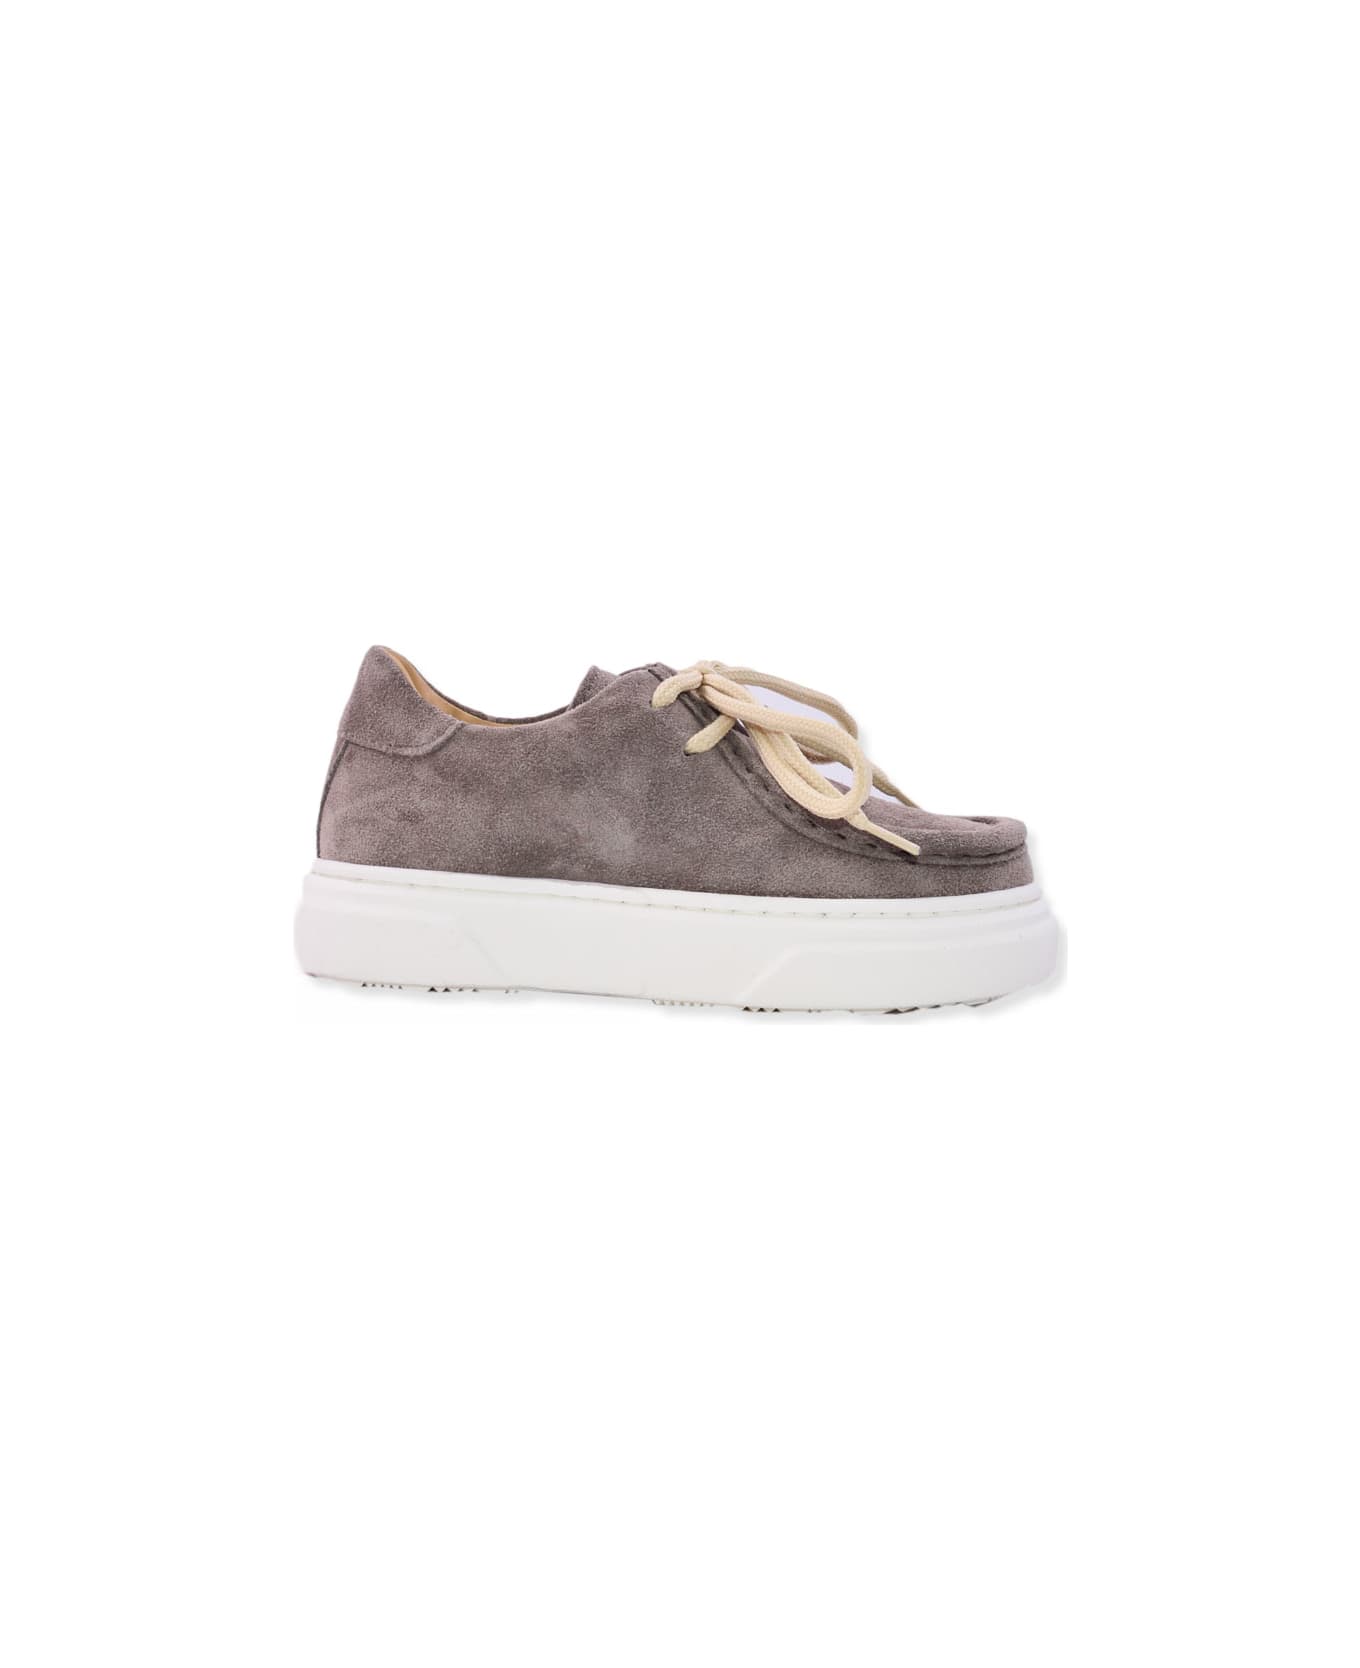 Andrea Montelpare Sneakers In Suede Leather - Beige